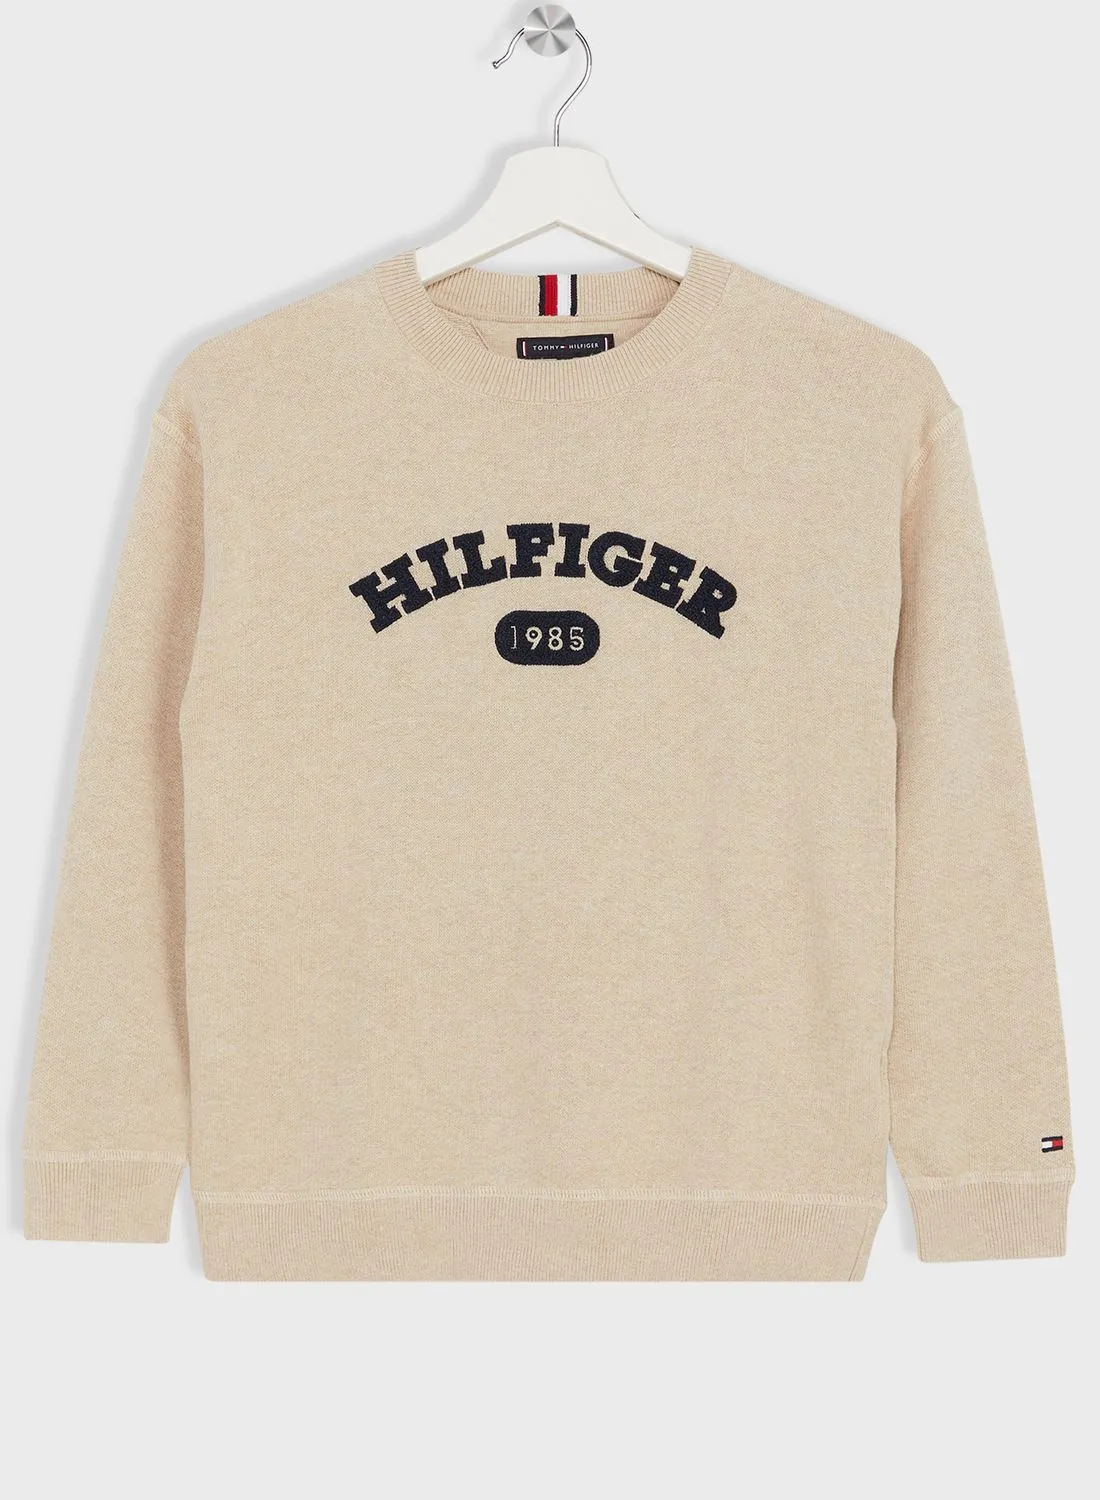 TOMMY HILFIGER Youth Varsity Sweater